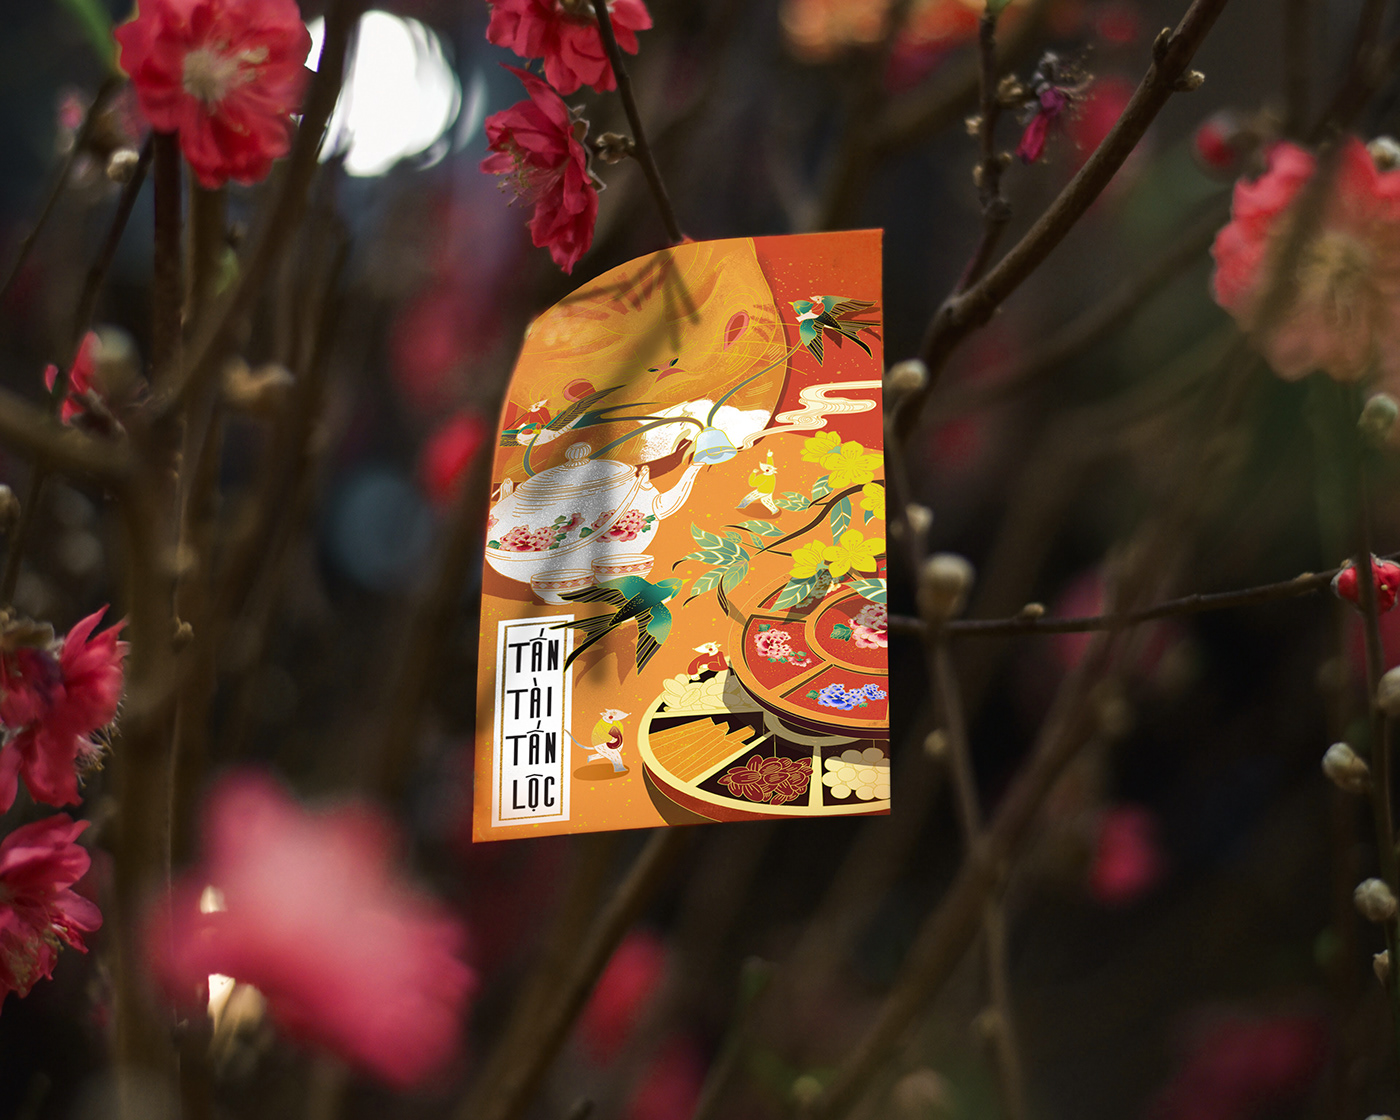 Lunar New Year Red Envelope happy new year mouse year of the mouse tet Tet Holiday vietnam